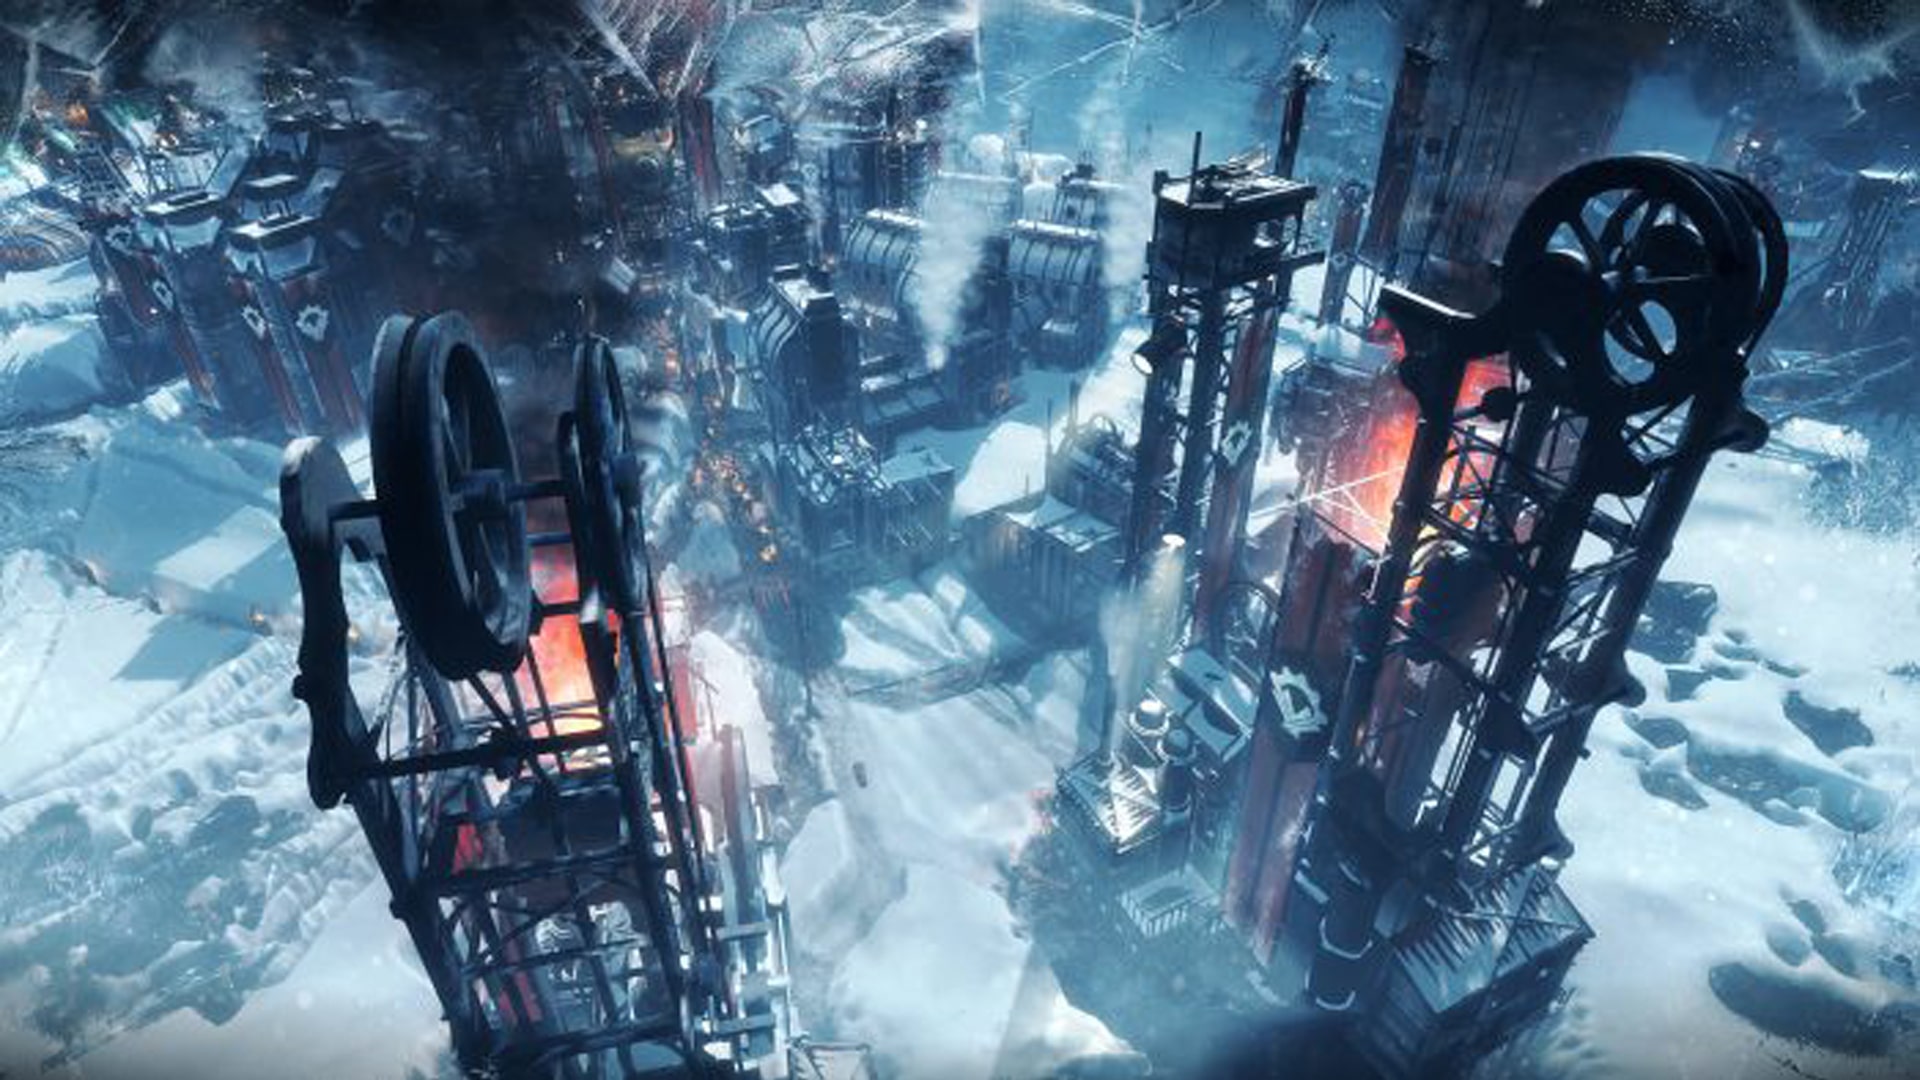 Dramatic depiction of the Great Storm, a key event in Frostpunk